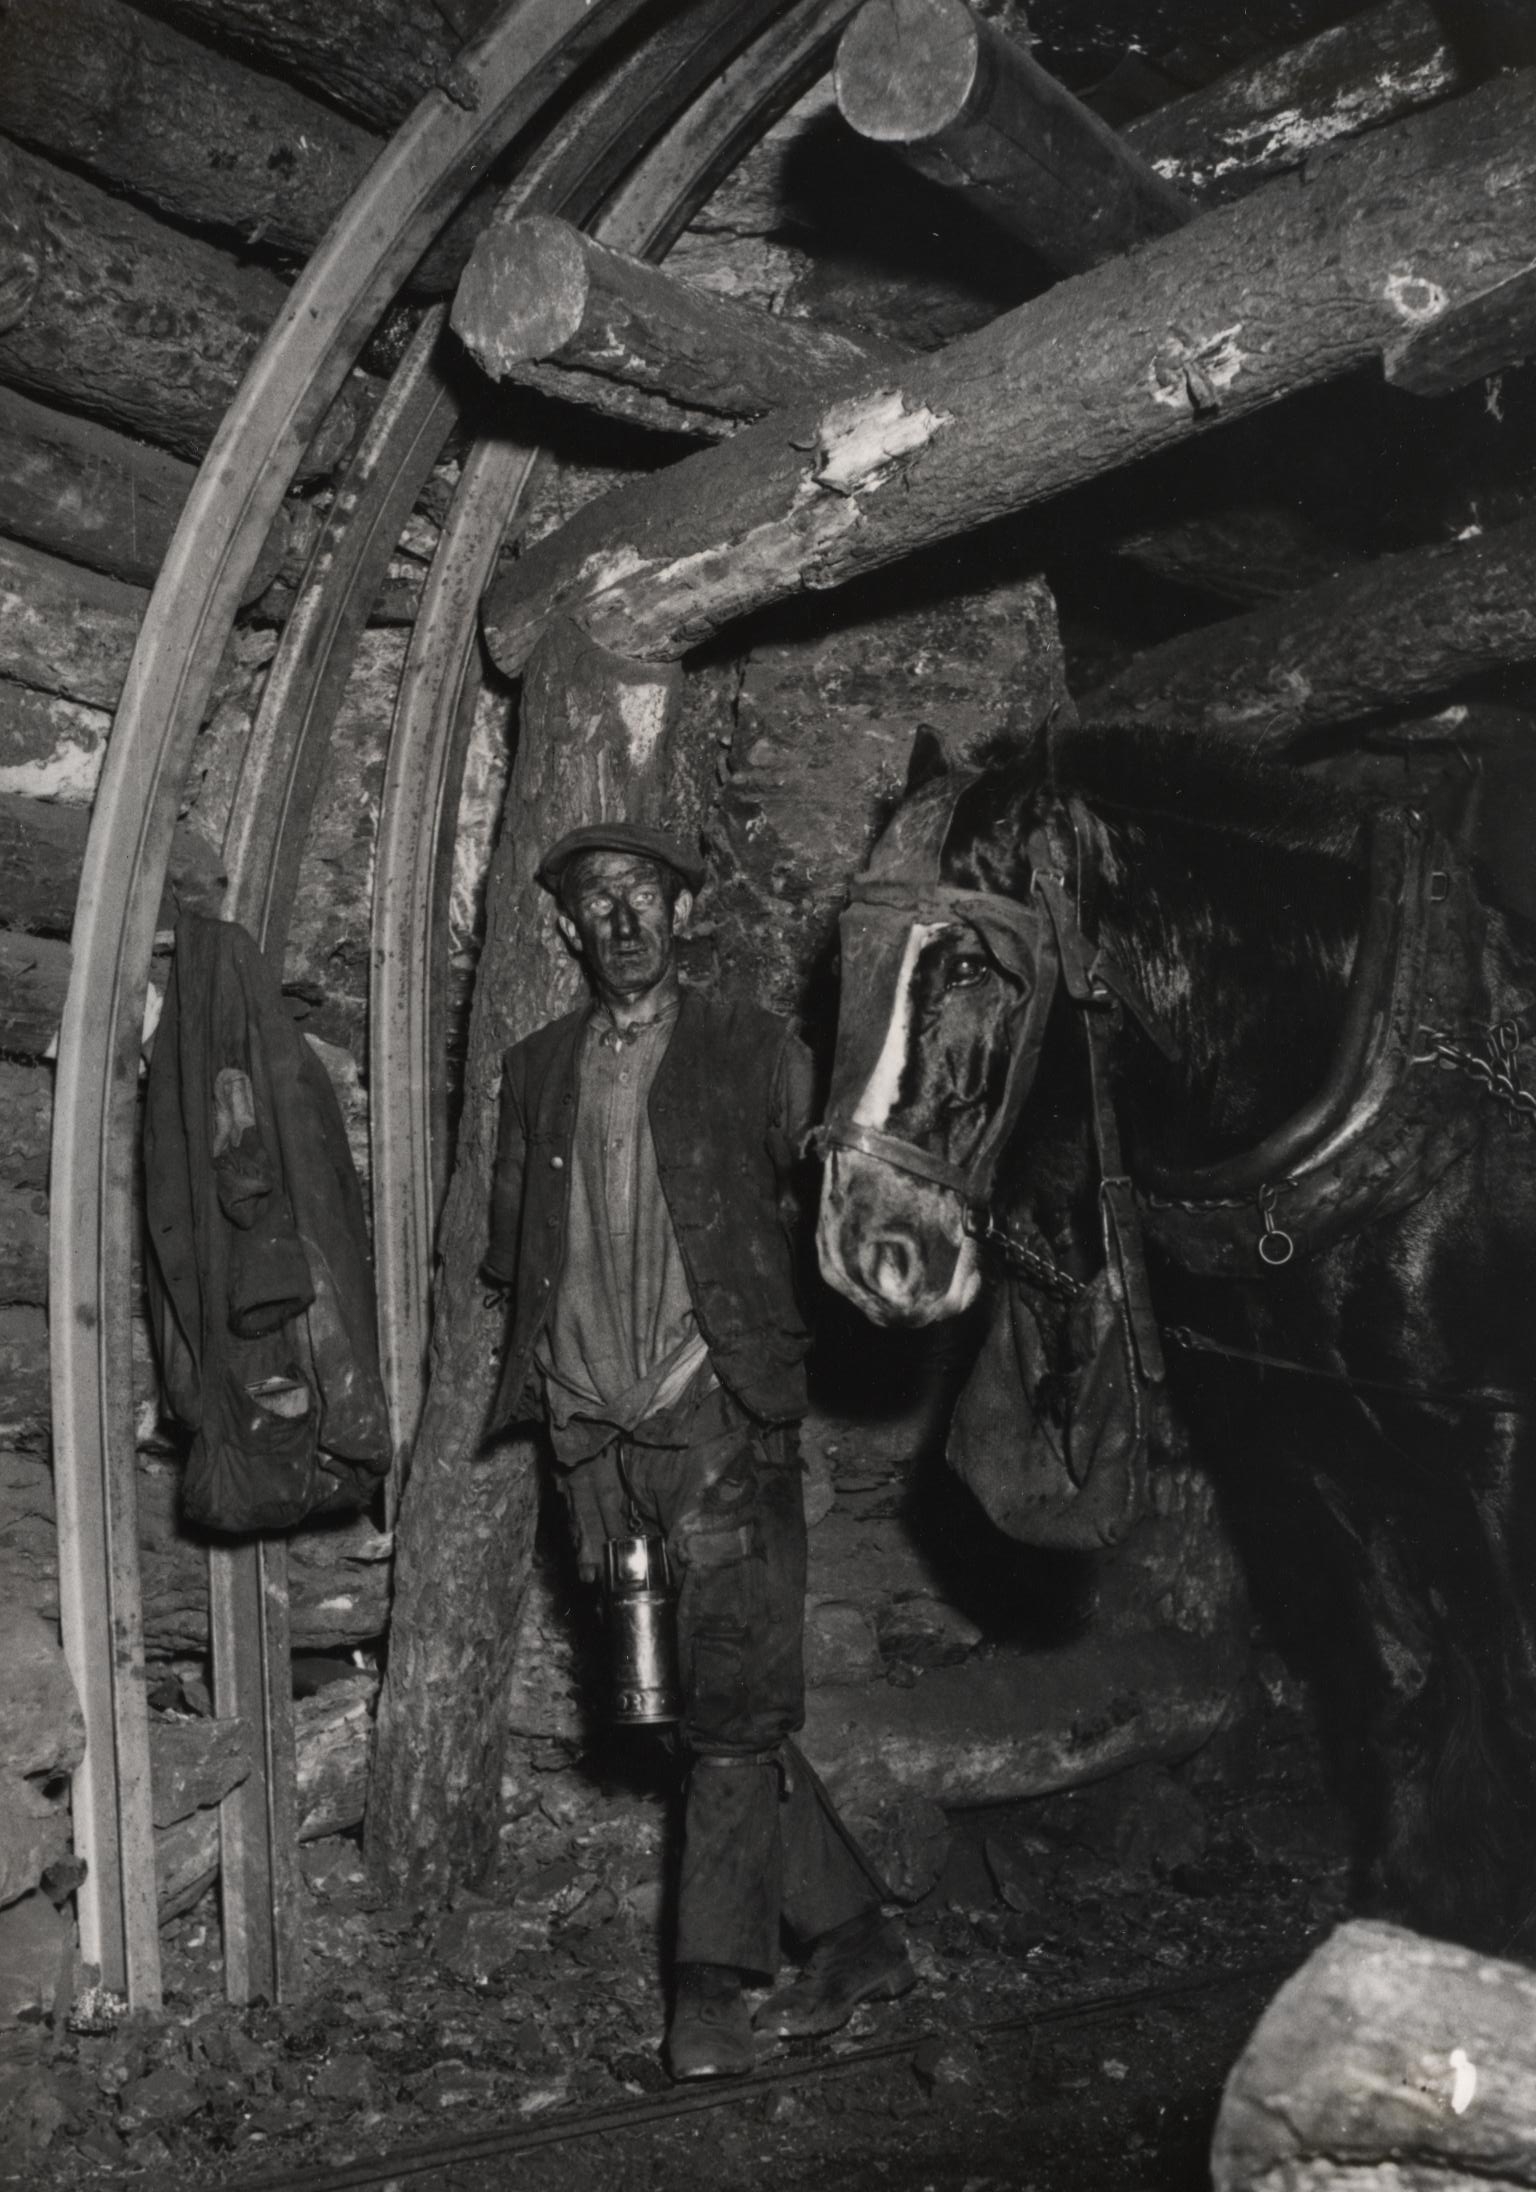 A miner stands by wooden beams in a coal mine; he stands next to a Welsh Colliery Horse